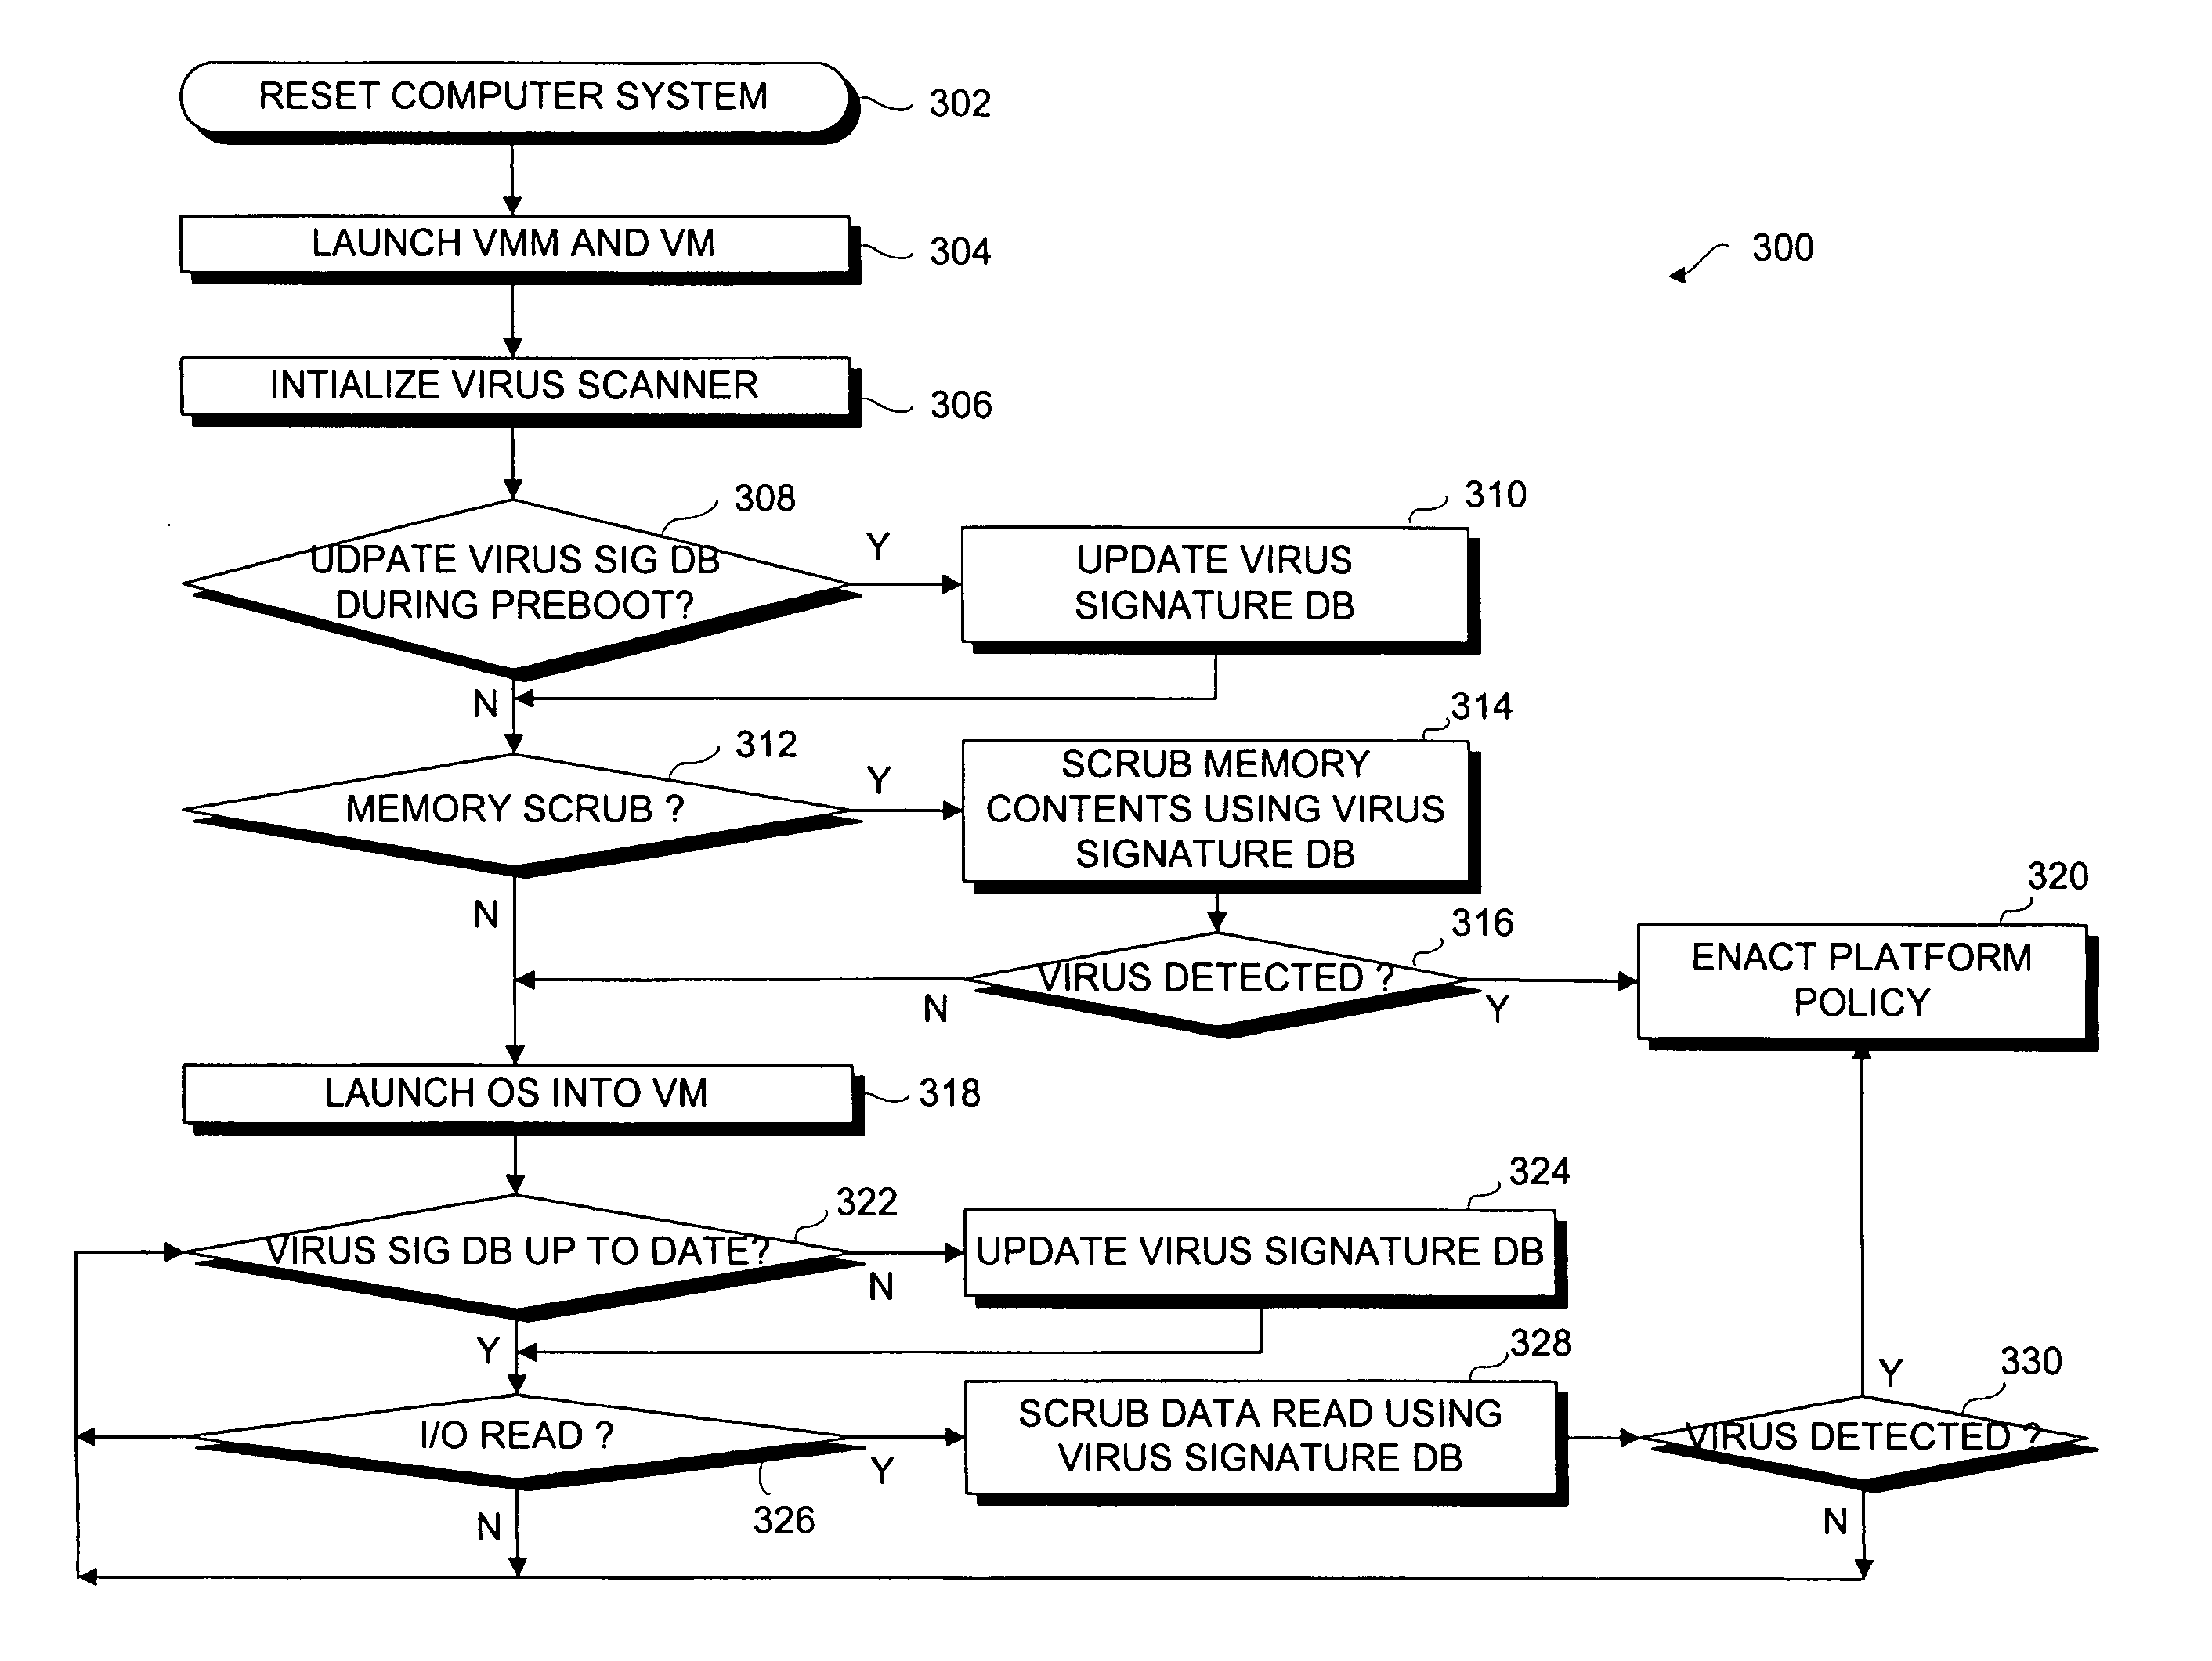 Virus scanning of input/output traffic of a computer system